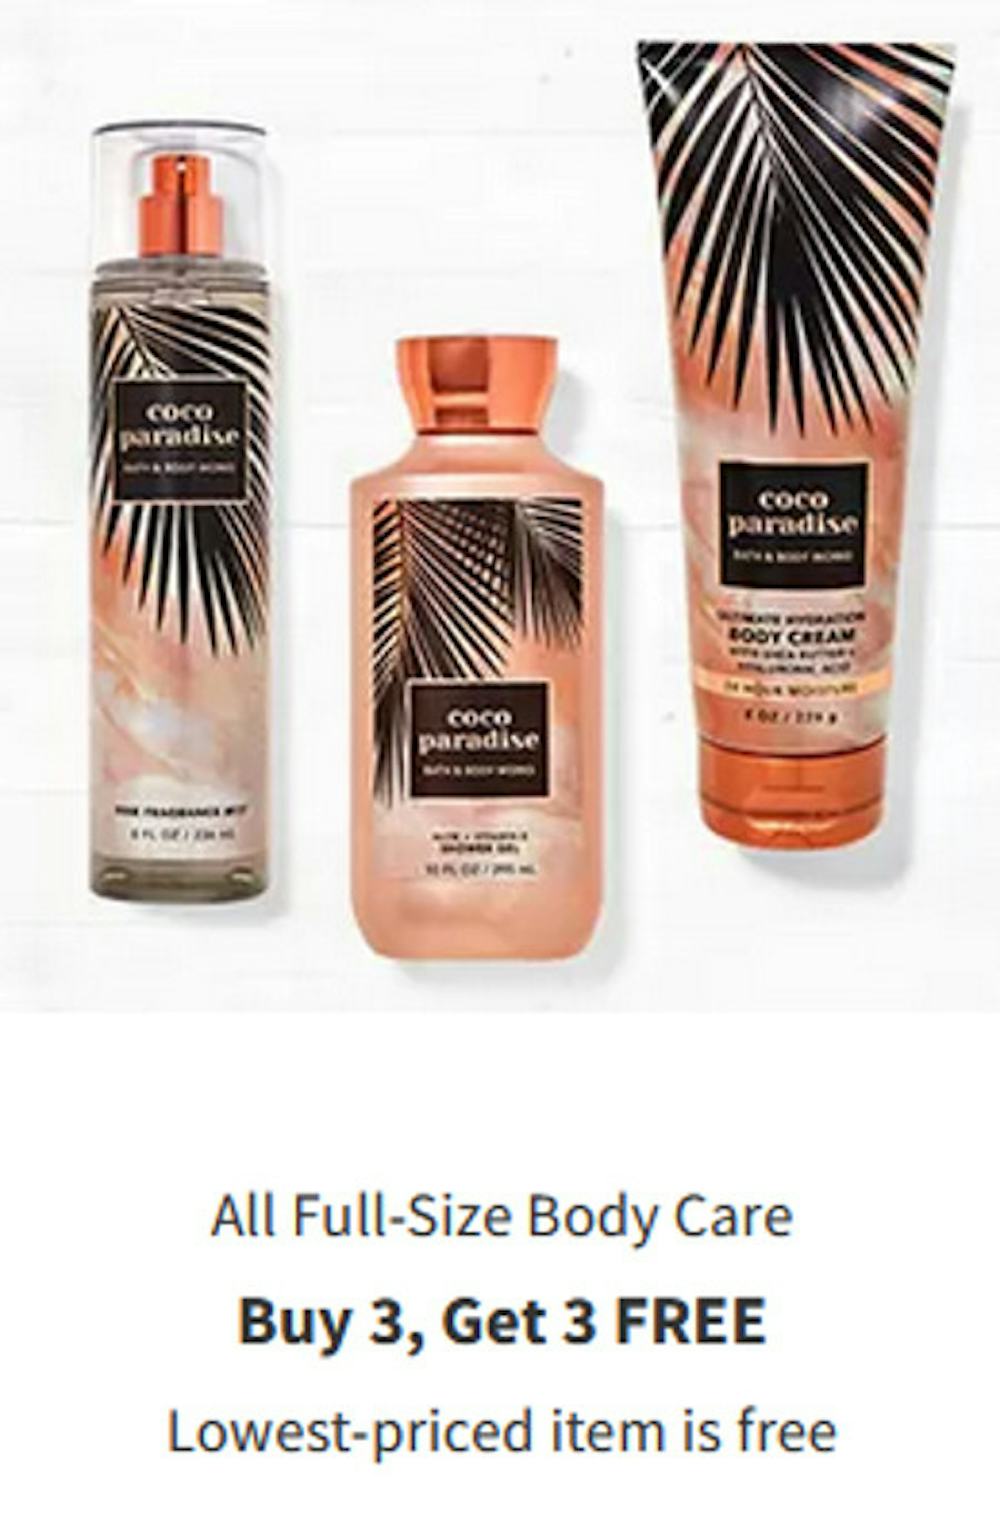 All Full-Size Body Care Buy 3, Get 3 Free